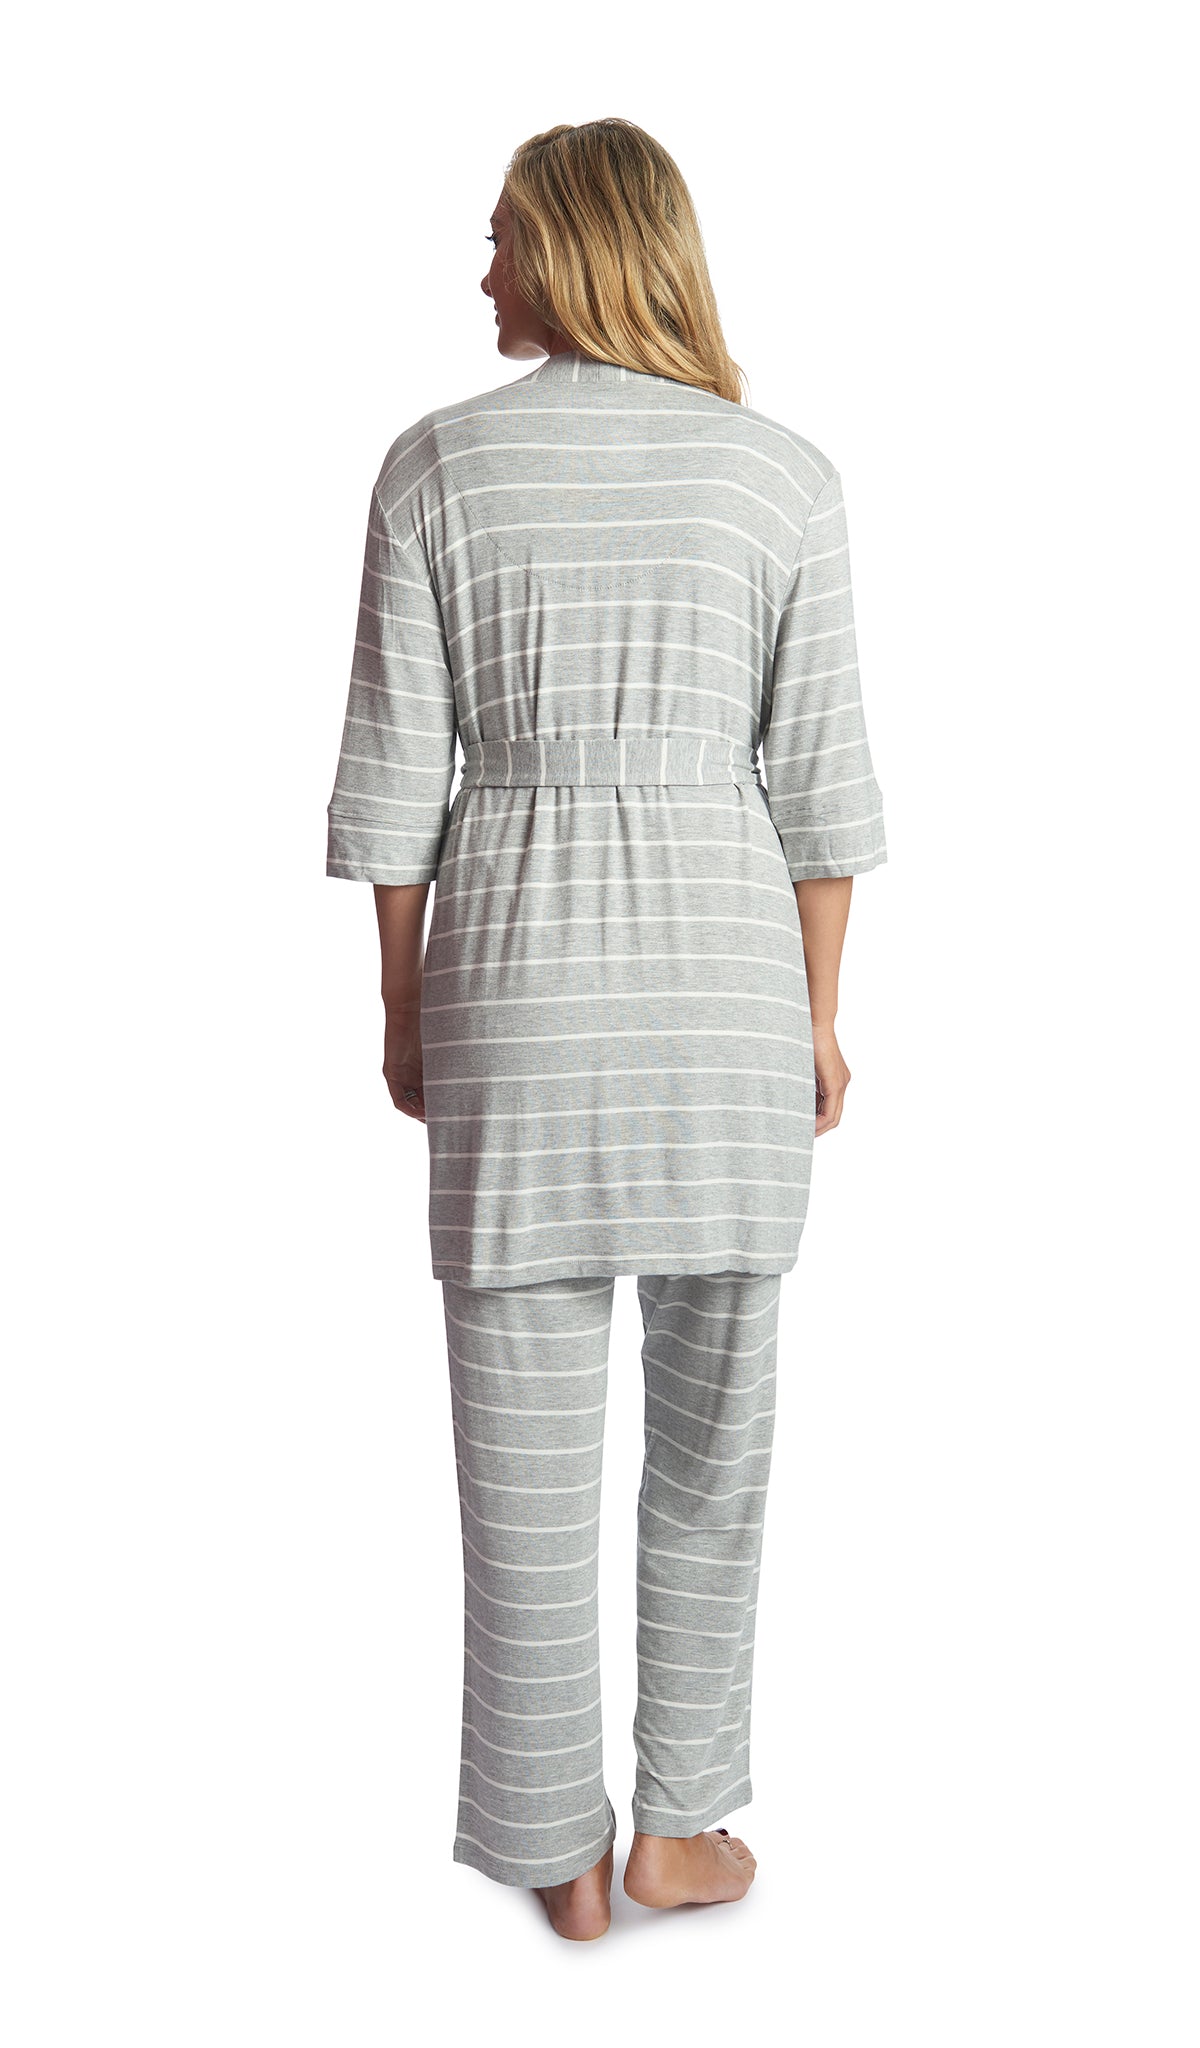 Heather Grey Analise 3-Piece Set, back shot of woman wearing robe and pant.